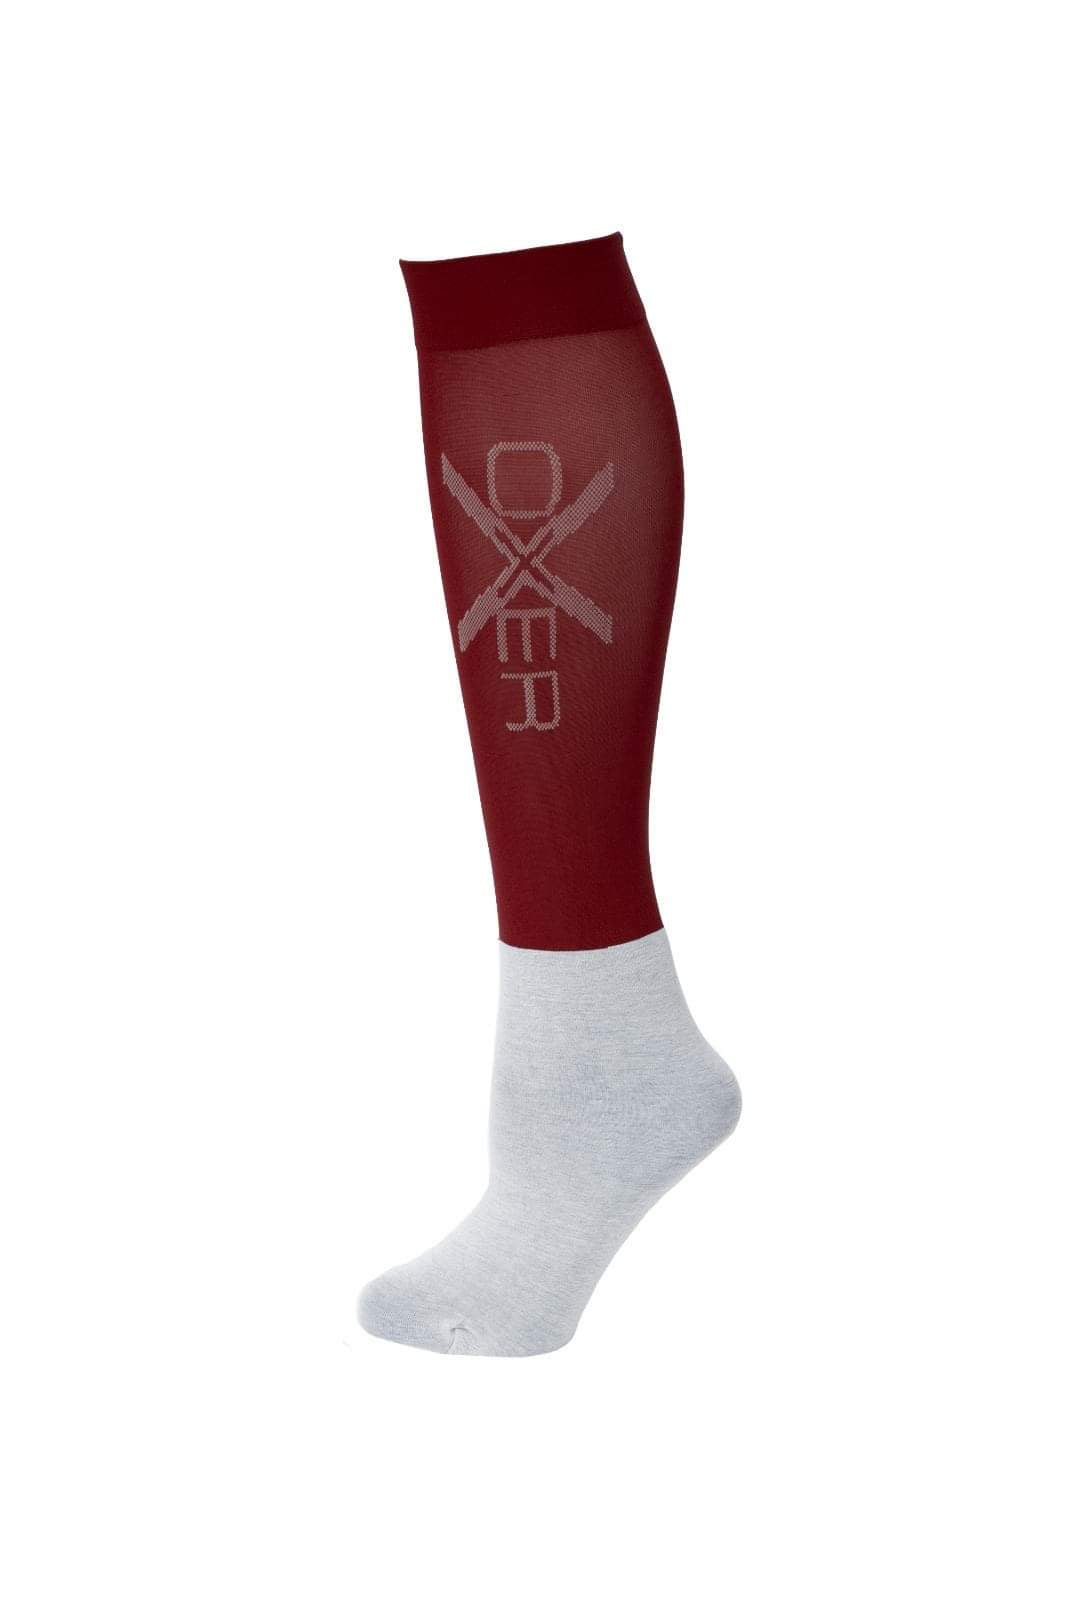 Oxer Riding Socks in Burgundy Pack of 3